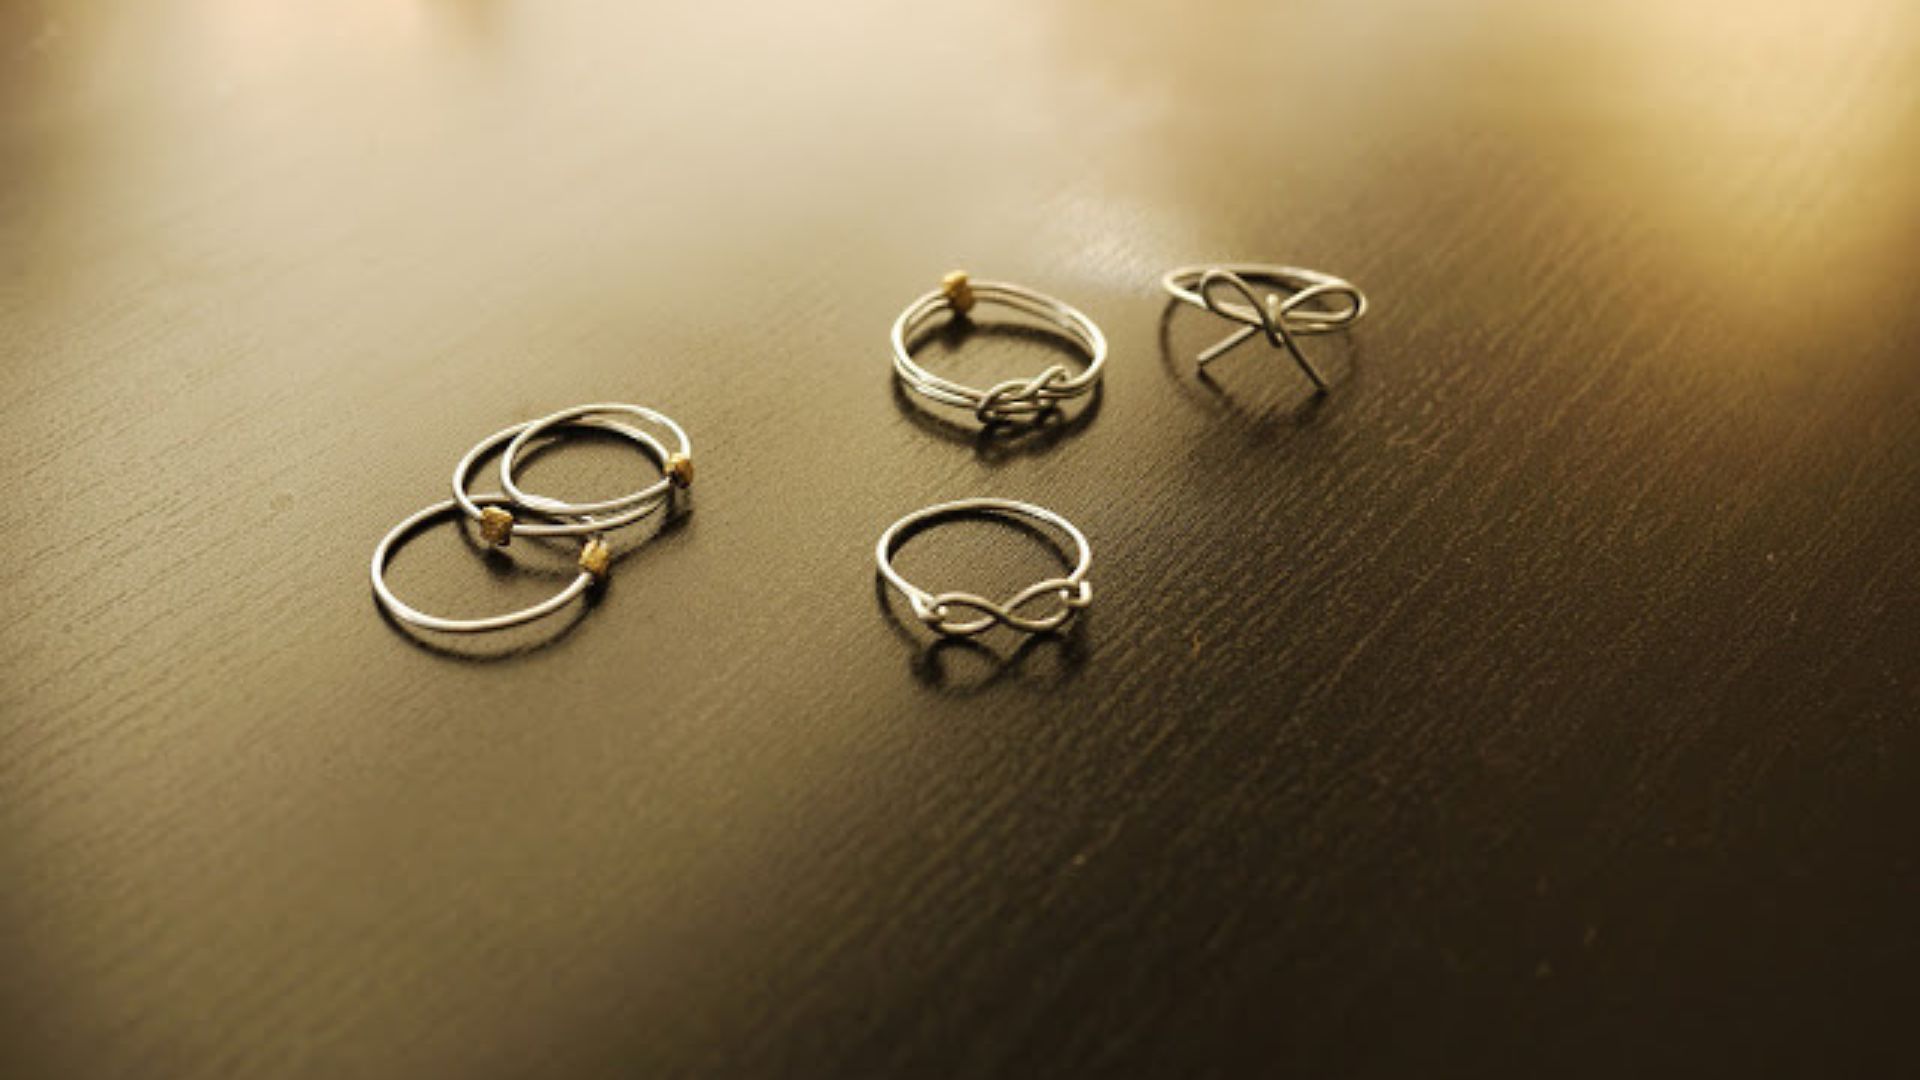 Knot Rings - A Unique And Symbolic Jewelry Piece